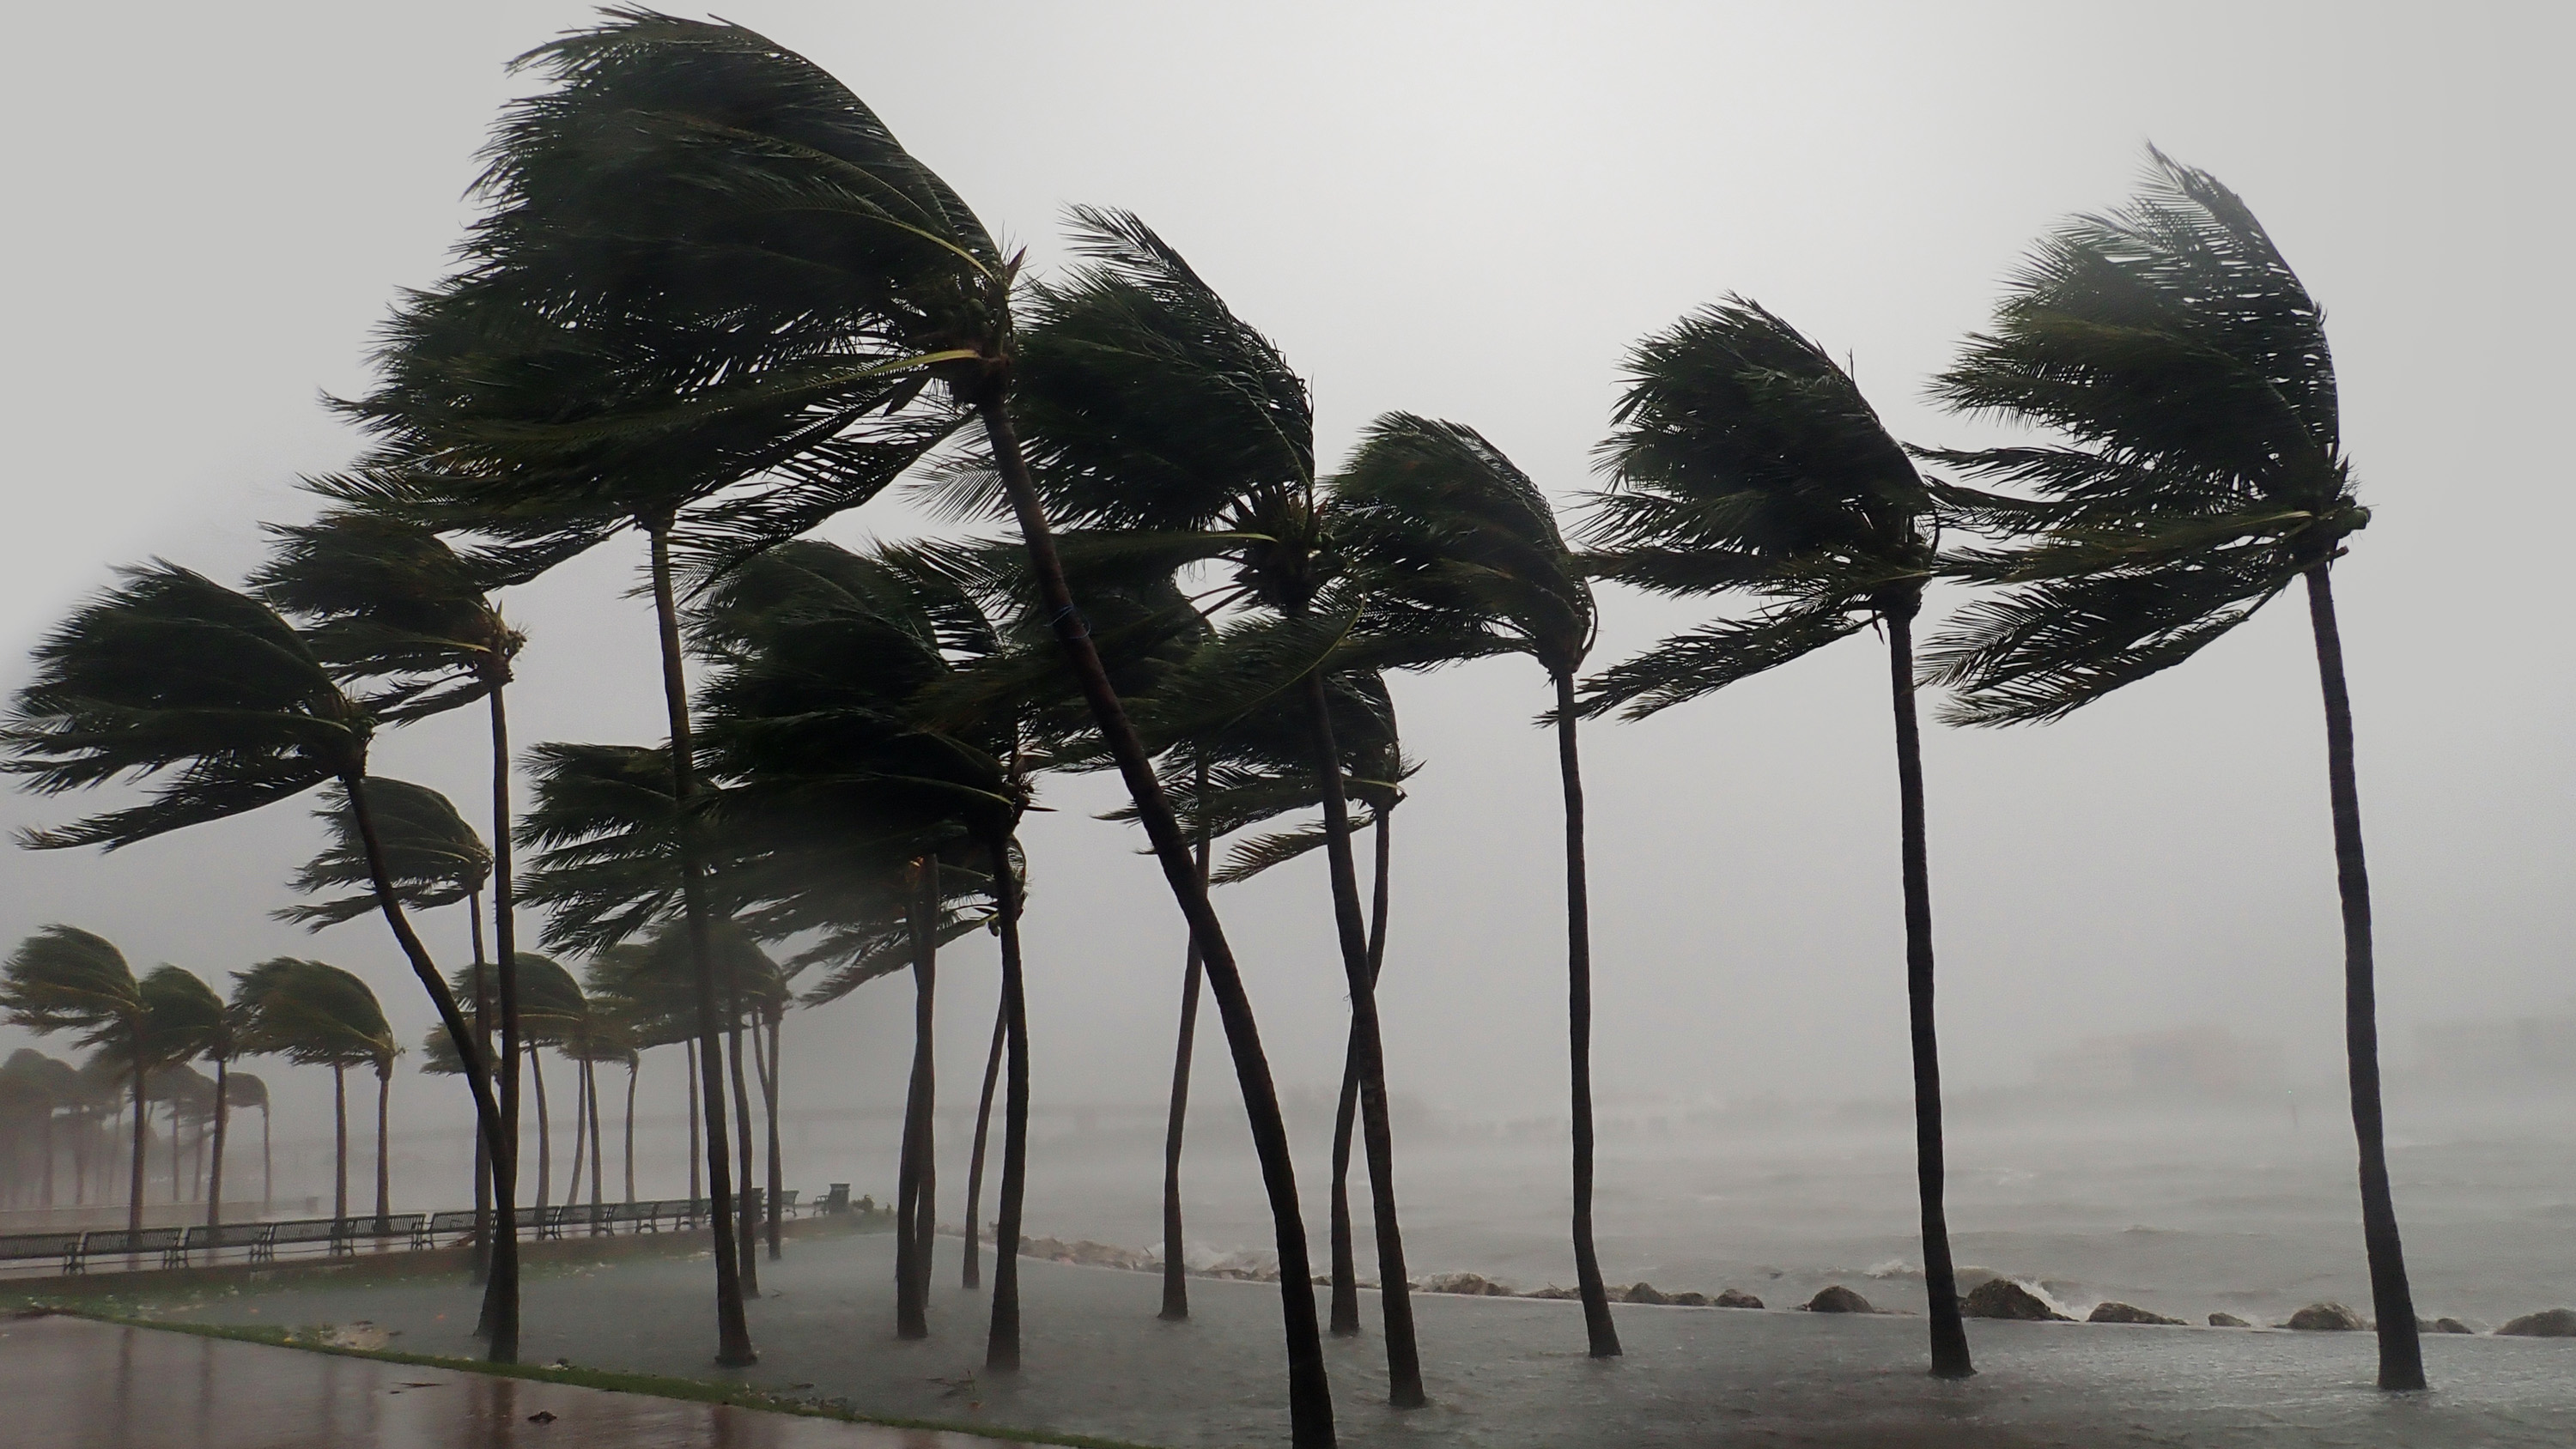 group of trees bending in high tropical winds